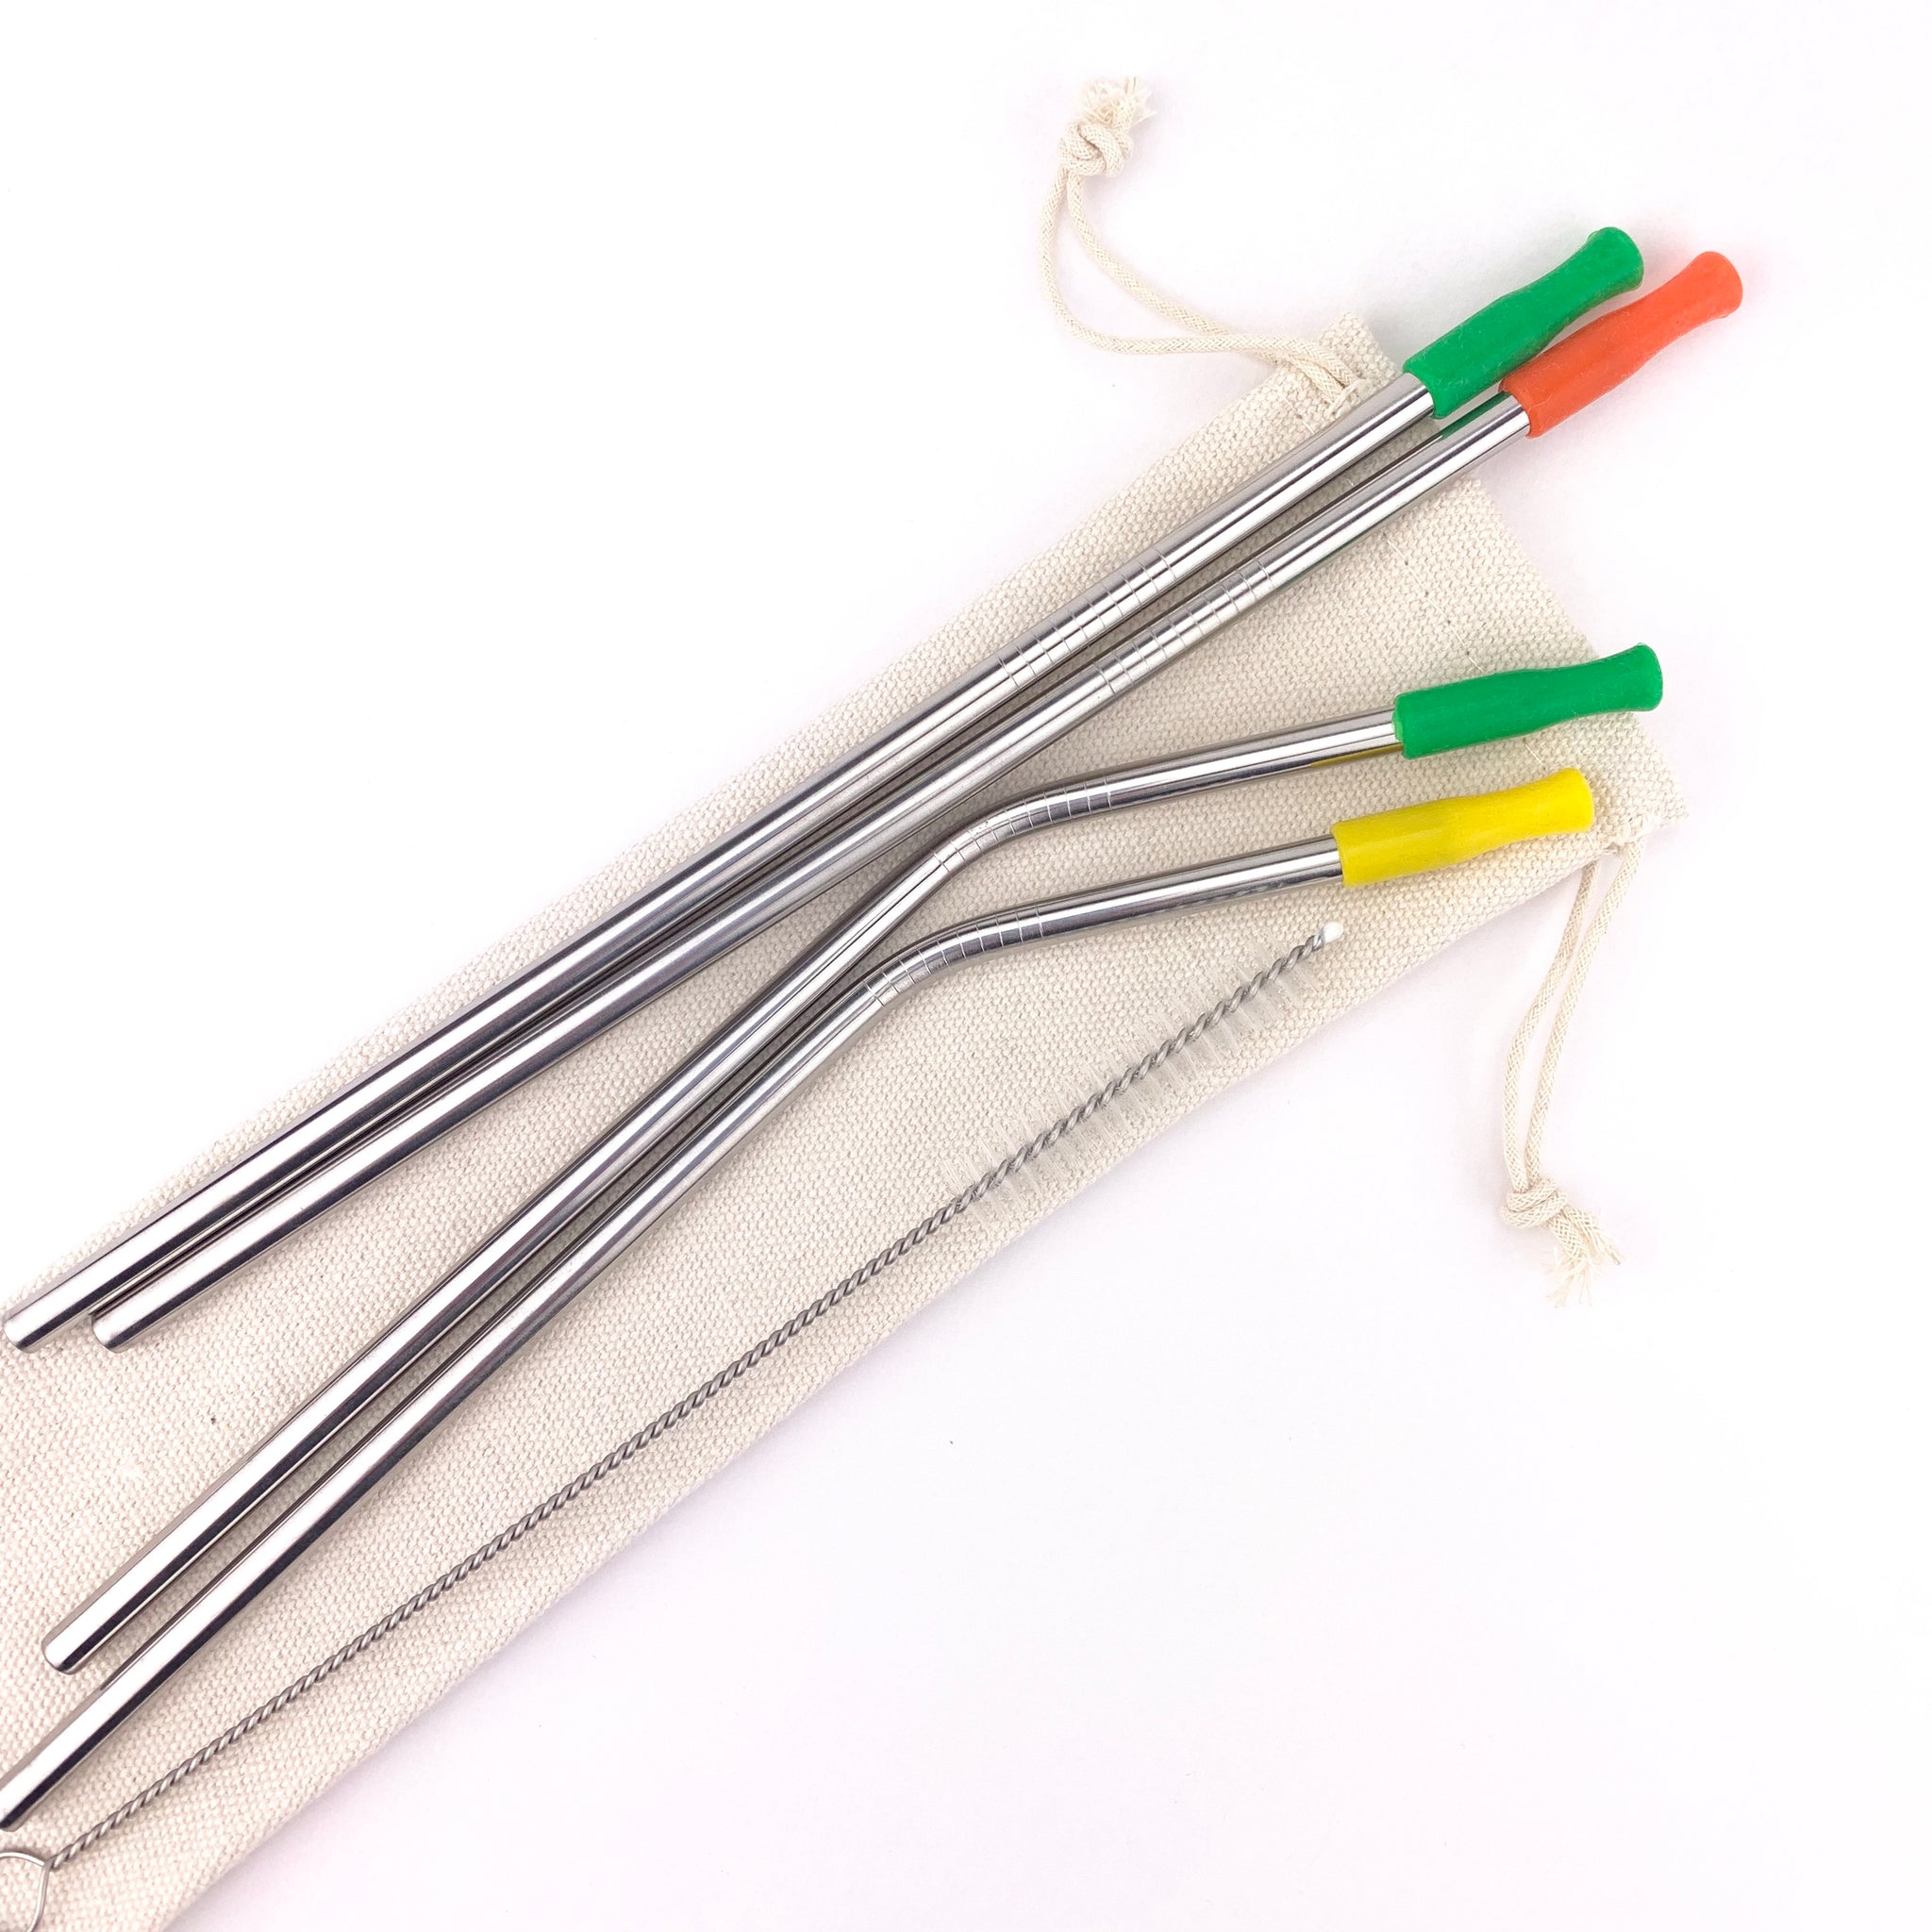 Stainless Steel Straw Set - With Silicone Tips